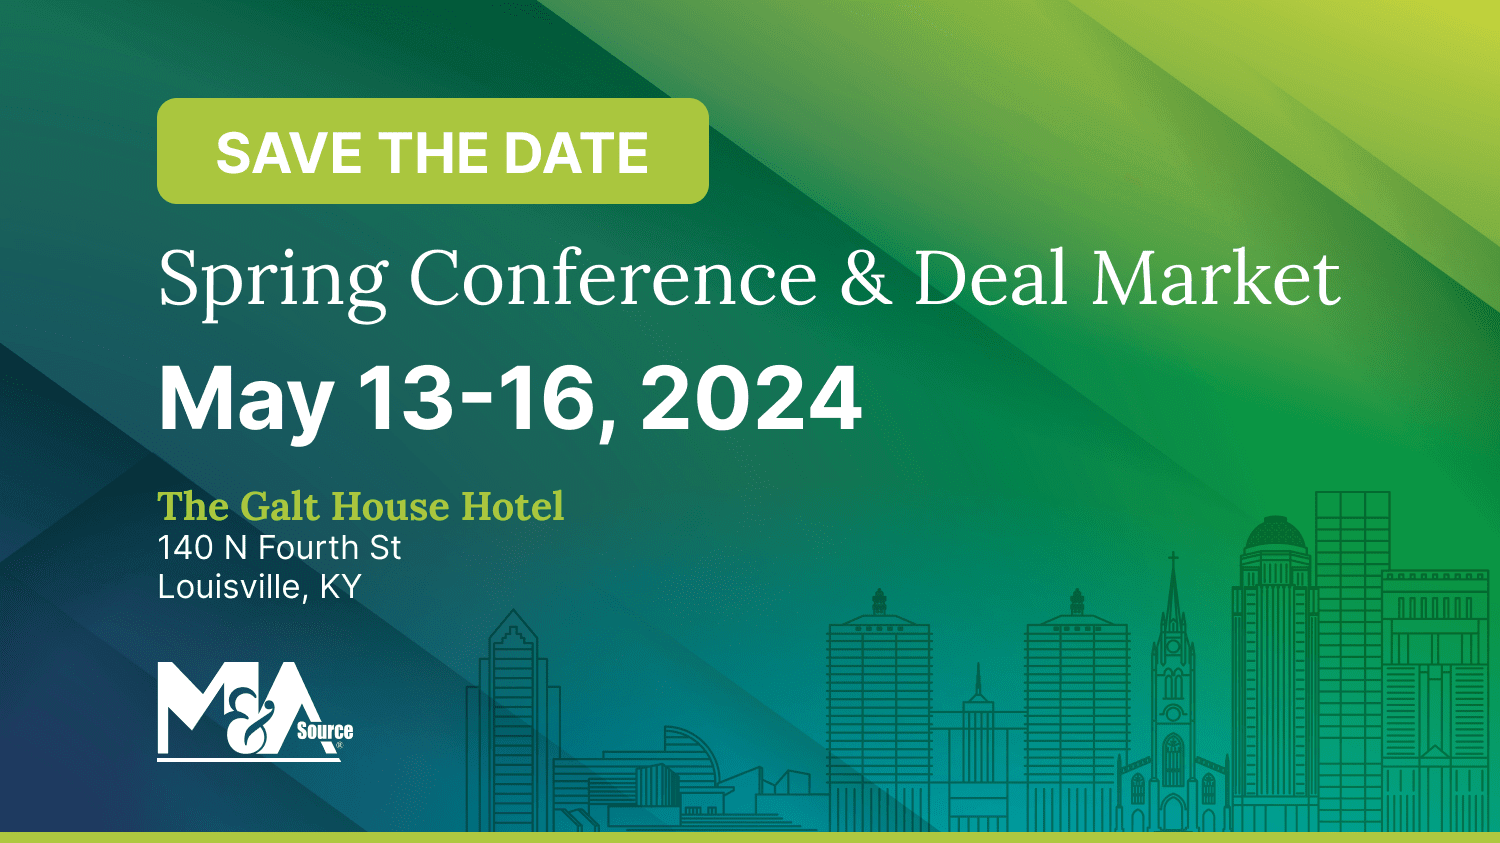 m-a-source-2024-spring-conference-deal-market-save-the-date